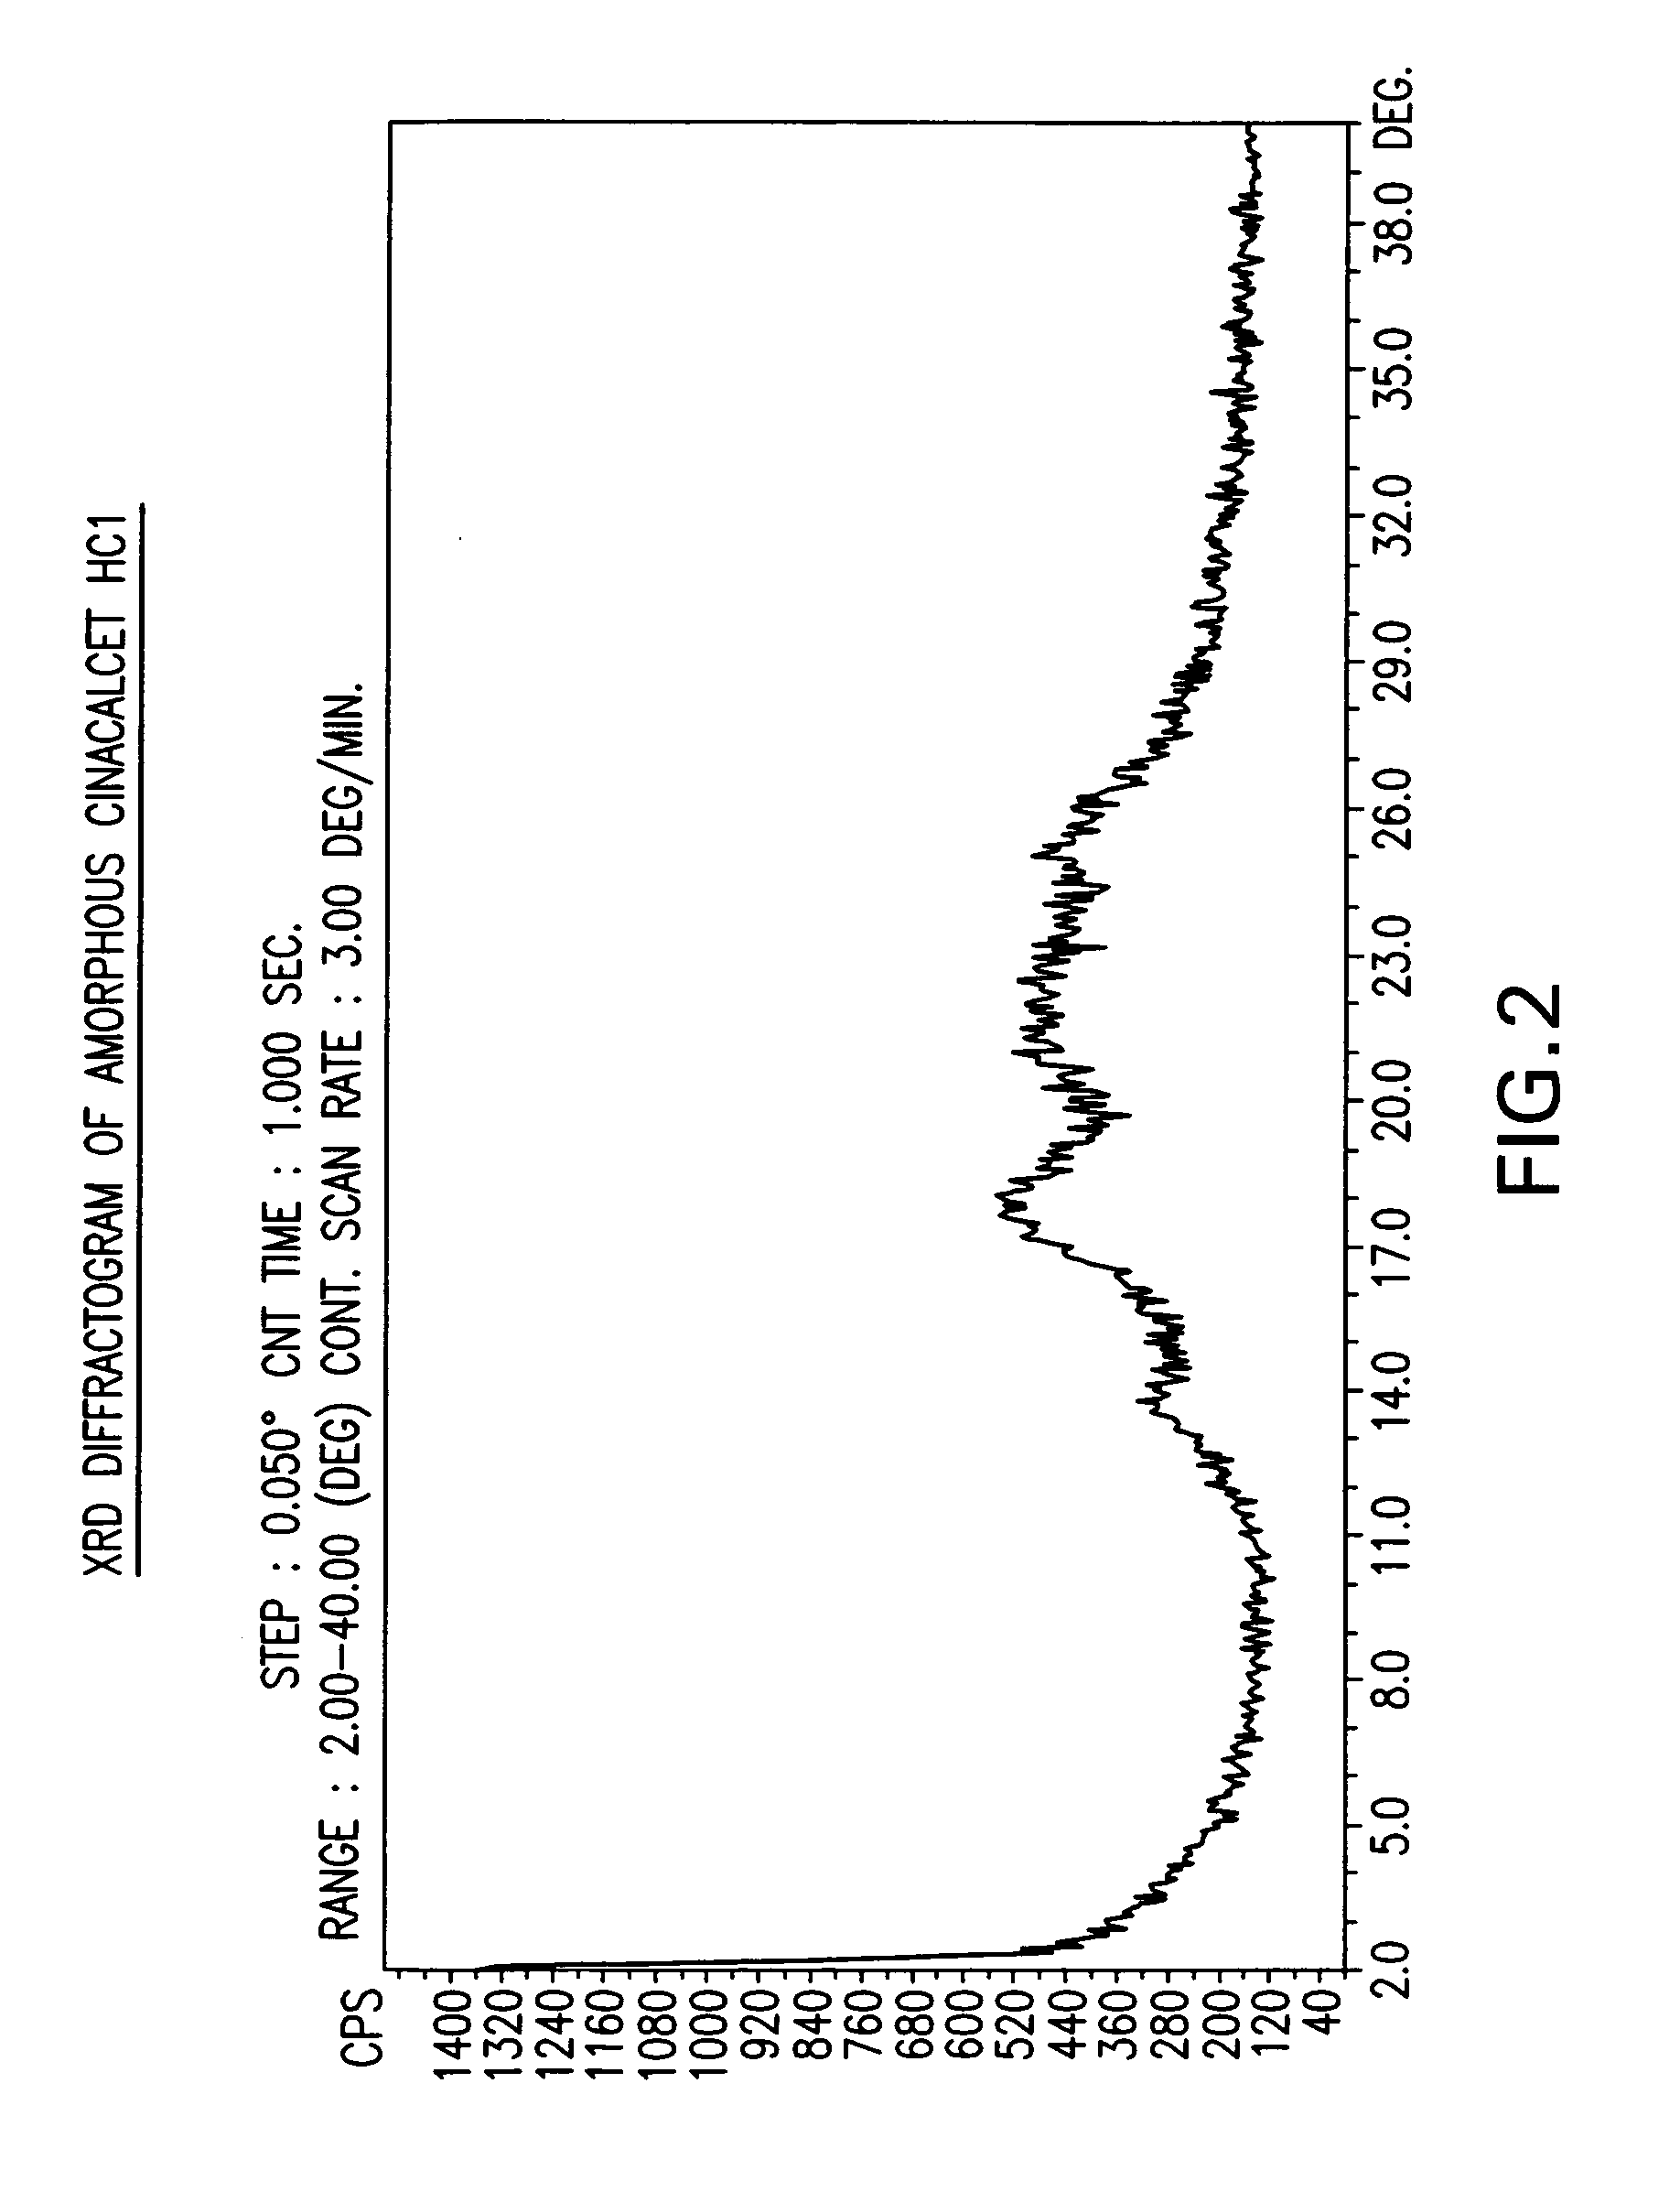 Amorphous cinacalcet hydrochloride and preparation thereof